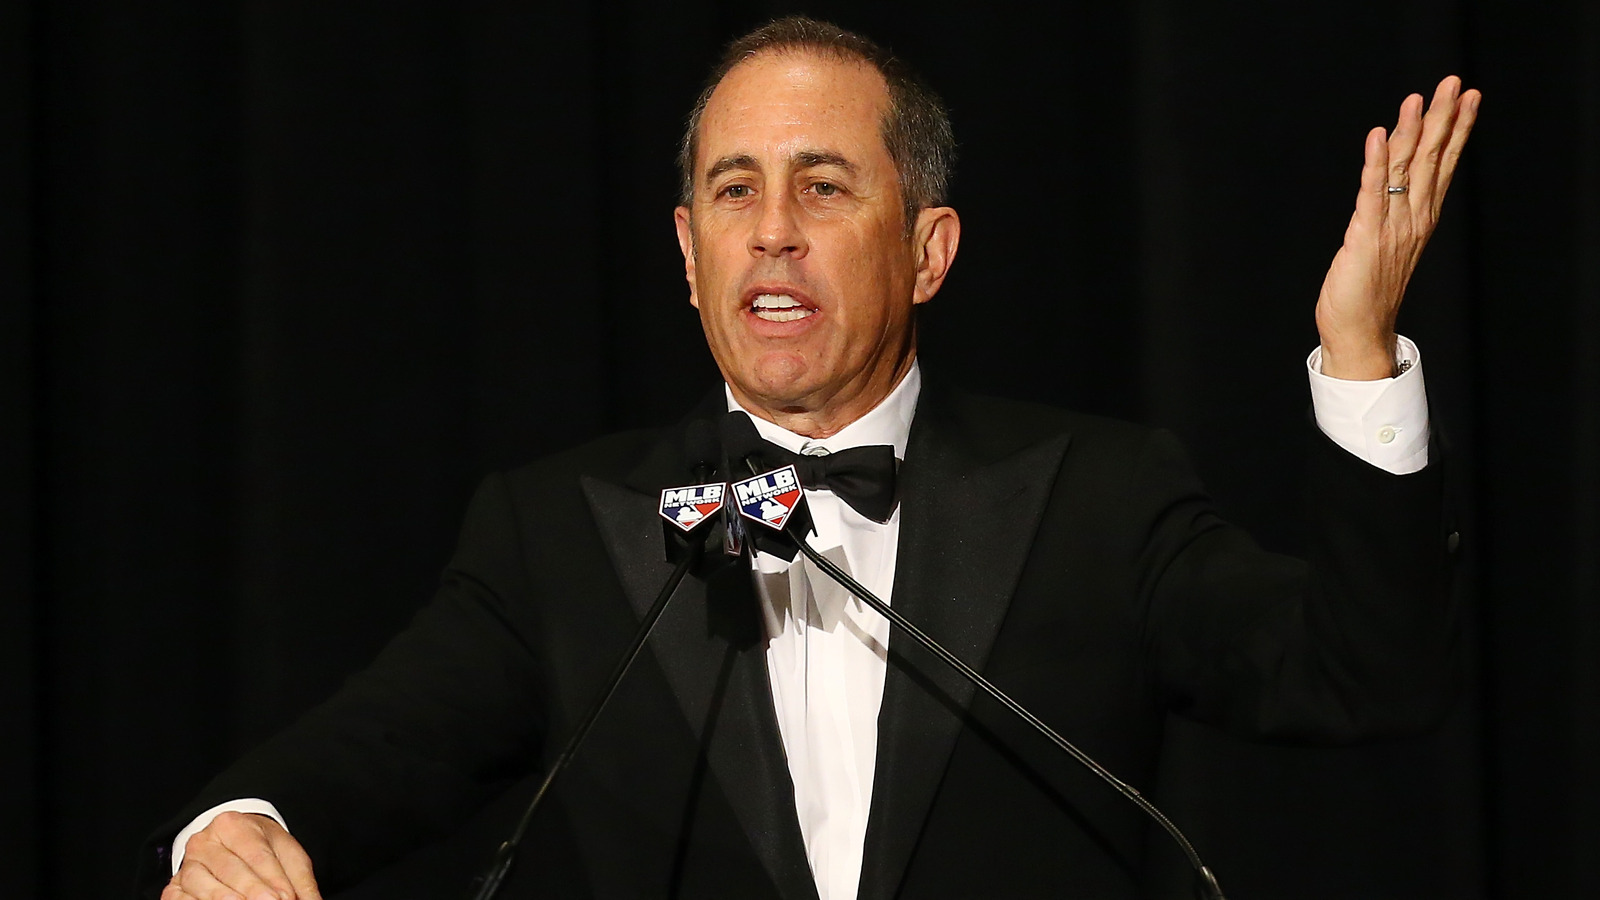 Jerry Seinfeld blames the Mets' recent woes on Timmy Trumpet